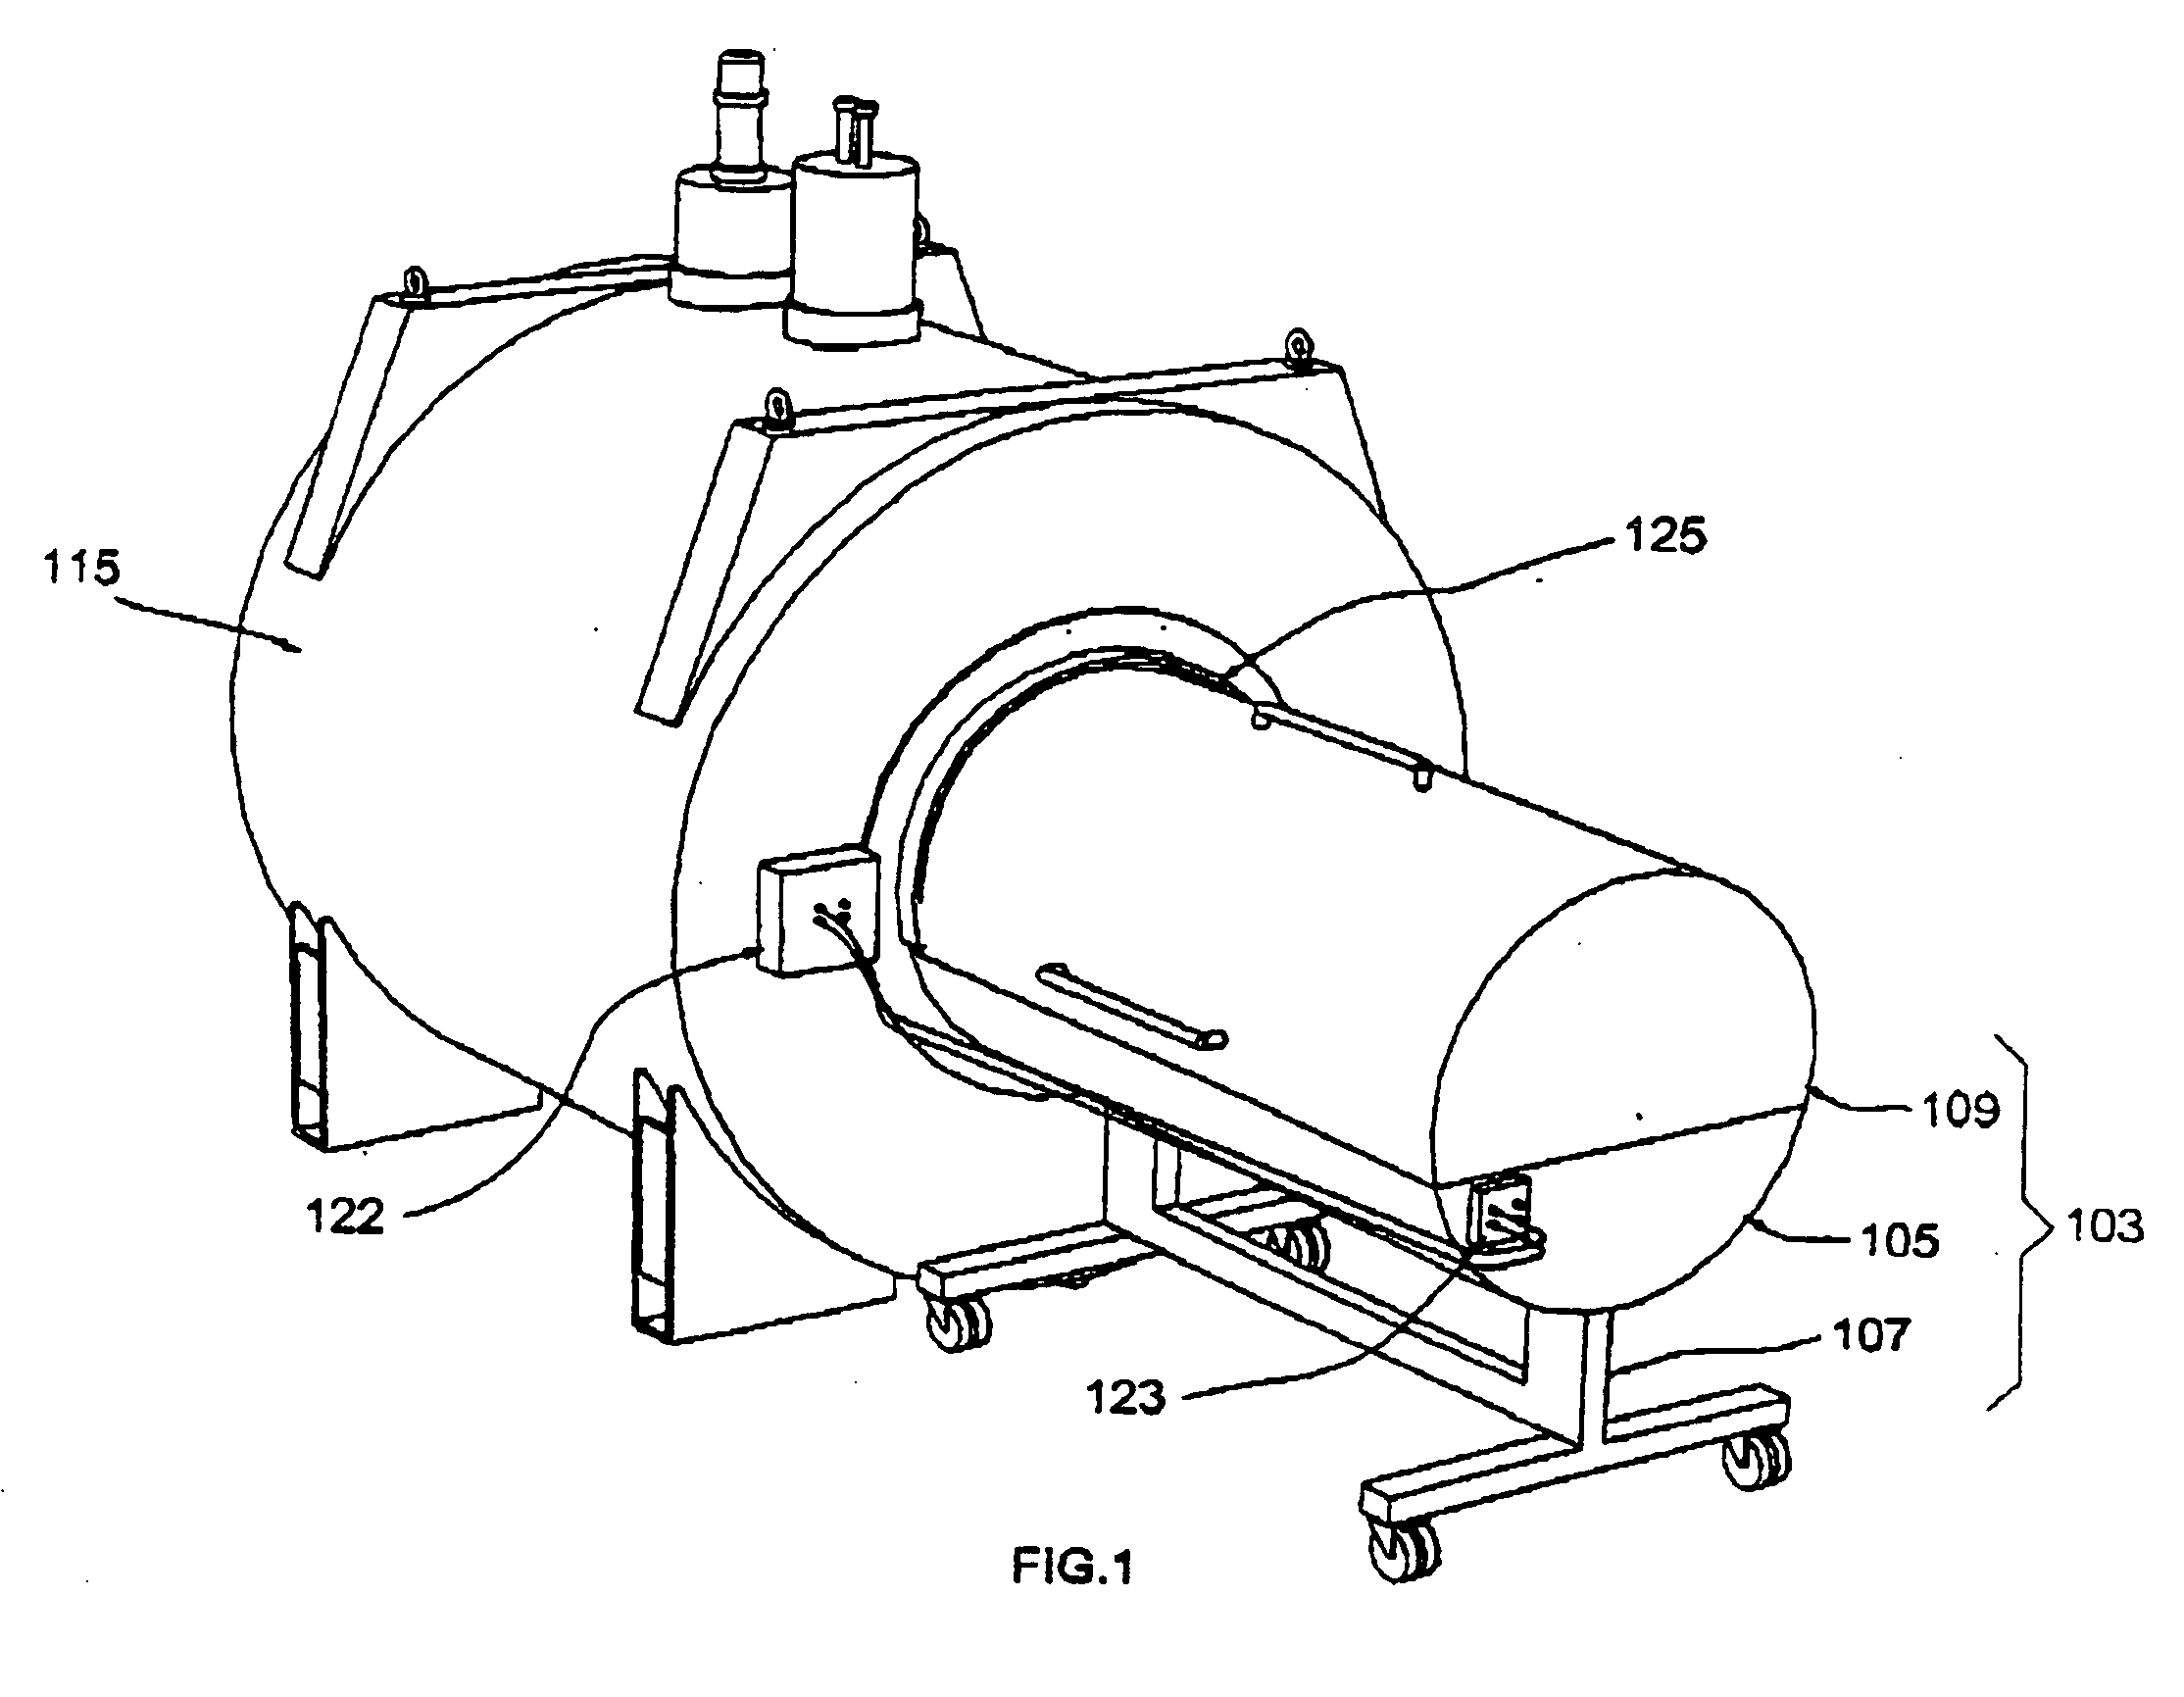 Radio frequency shield for nuclear magnetic resonance procedures